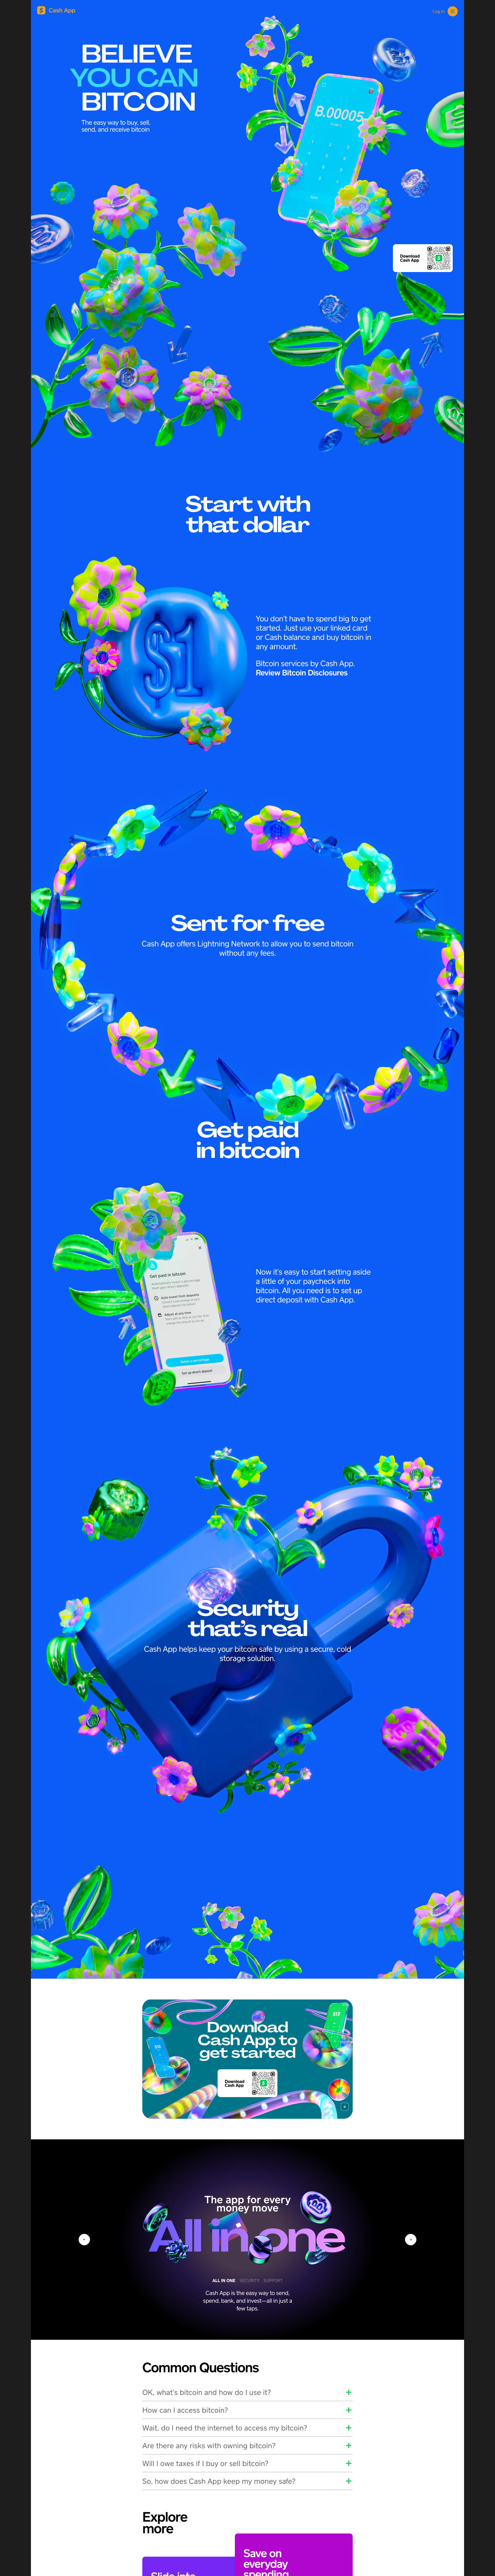 Cash App Landing Page Example: Cash App is the #1 finance app in the App Store. Pay anyone instantly. Save when you spend. Bank like you want to. And buy stocks or bitcoin with as little as $1.